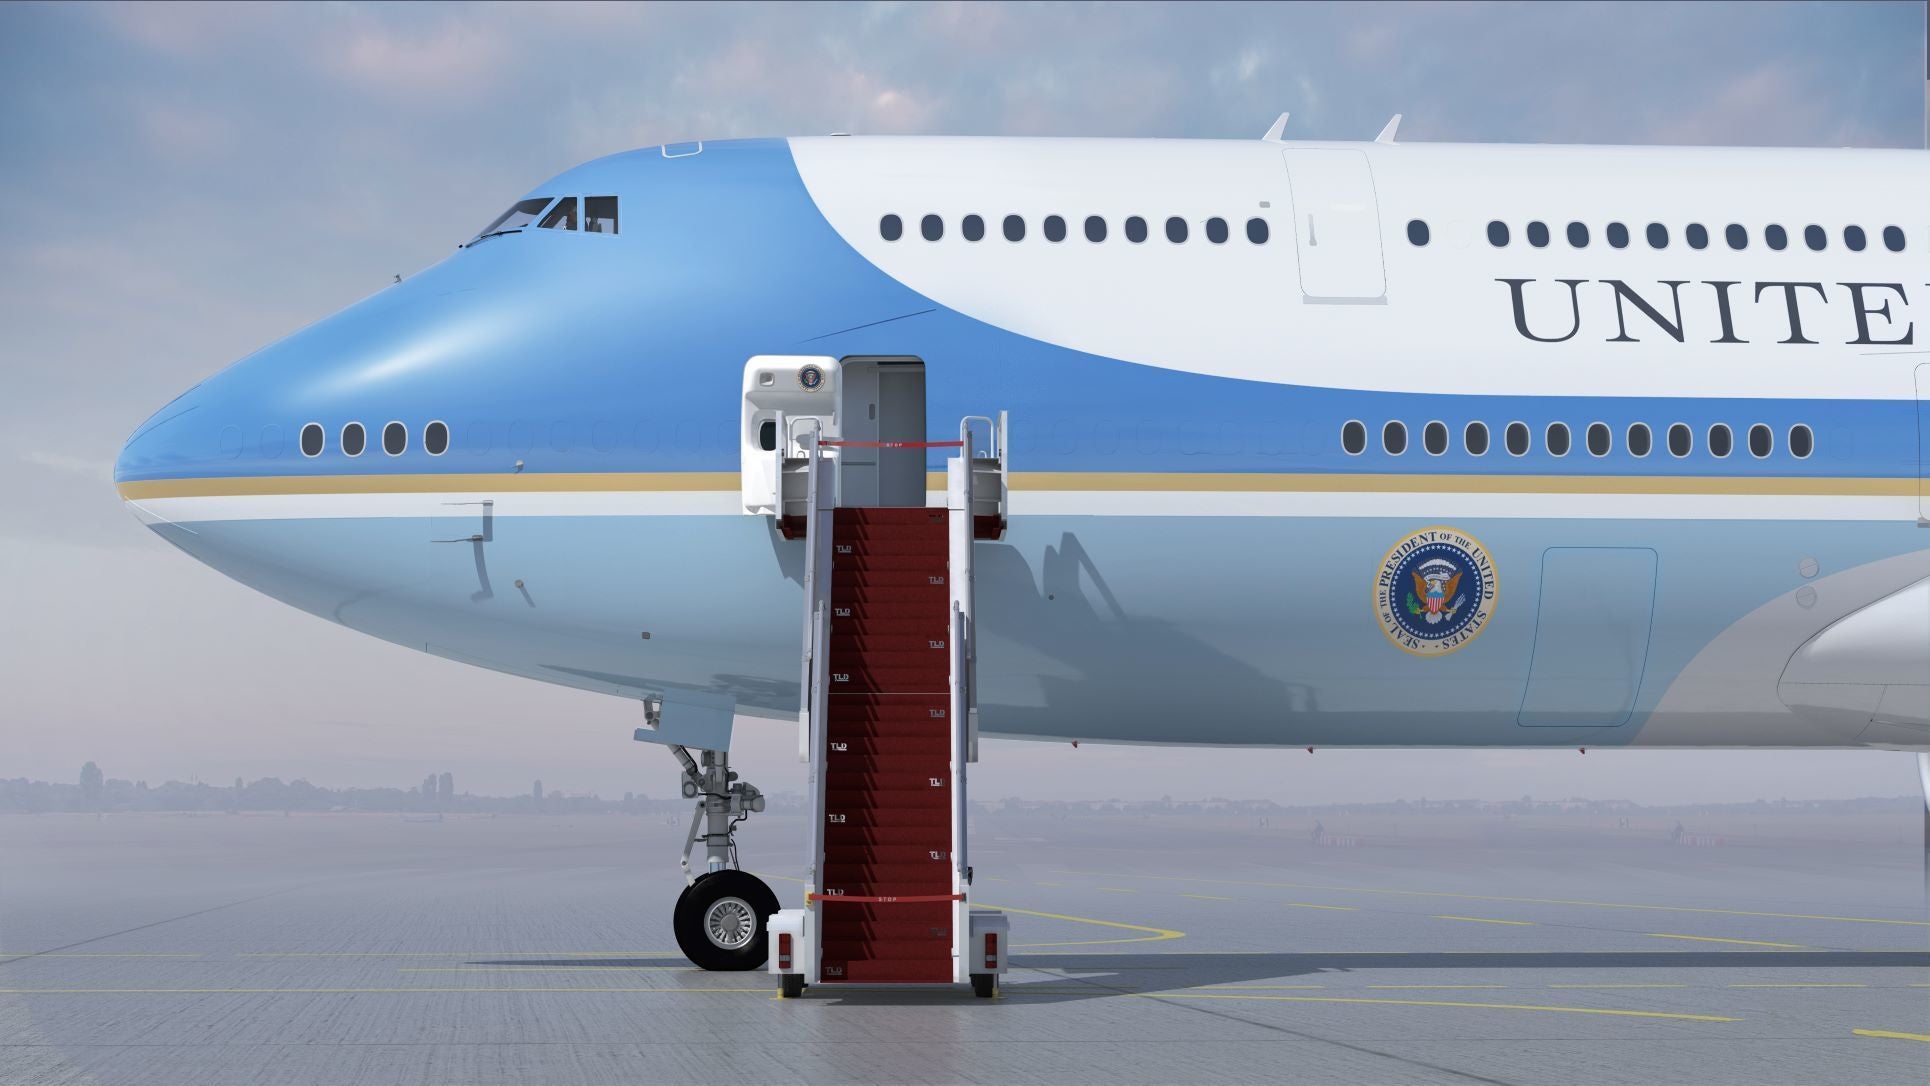 The President of the United States selected the livery design for the “Next Air Force One,” VC-25B, a design that will closely resemble the livery of the current Air Force One, VC-25A, while also modernizing for the 21st century. (Courtesy rendering)